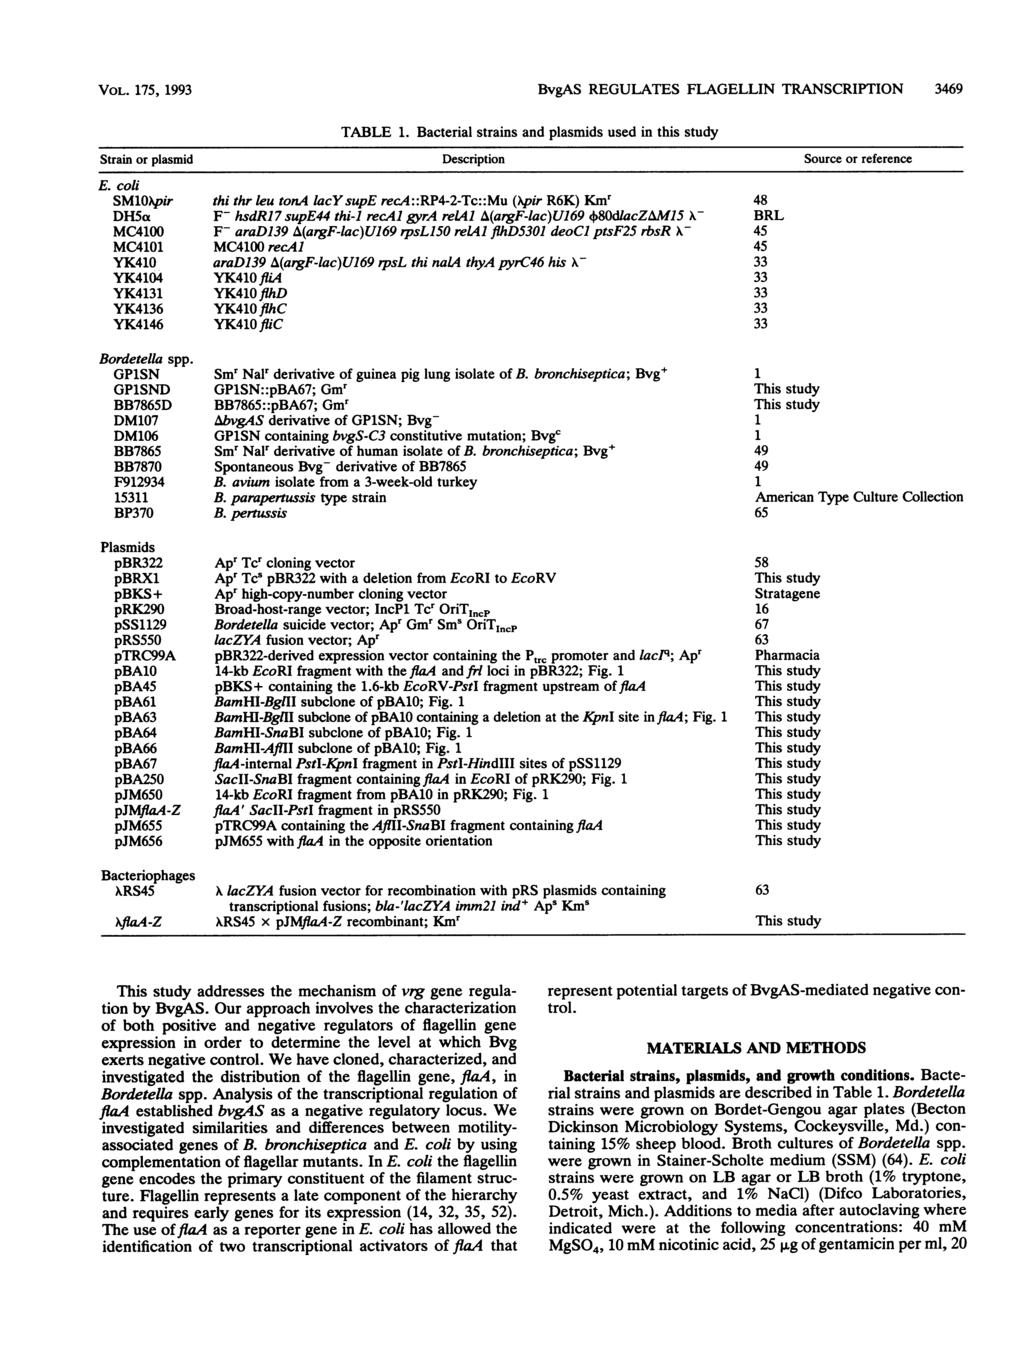 VOL. 175, 1993 BvgAS REGULATES FLAGELLIN TRANSCRIPTION 3469 TABLE 1. Bacterial strains and plasmids used in this study Strain or plasmid Description Source or reference E.